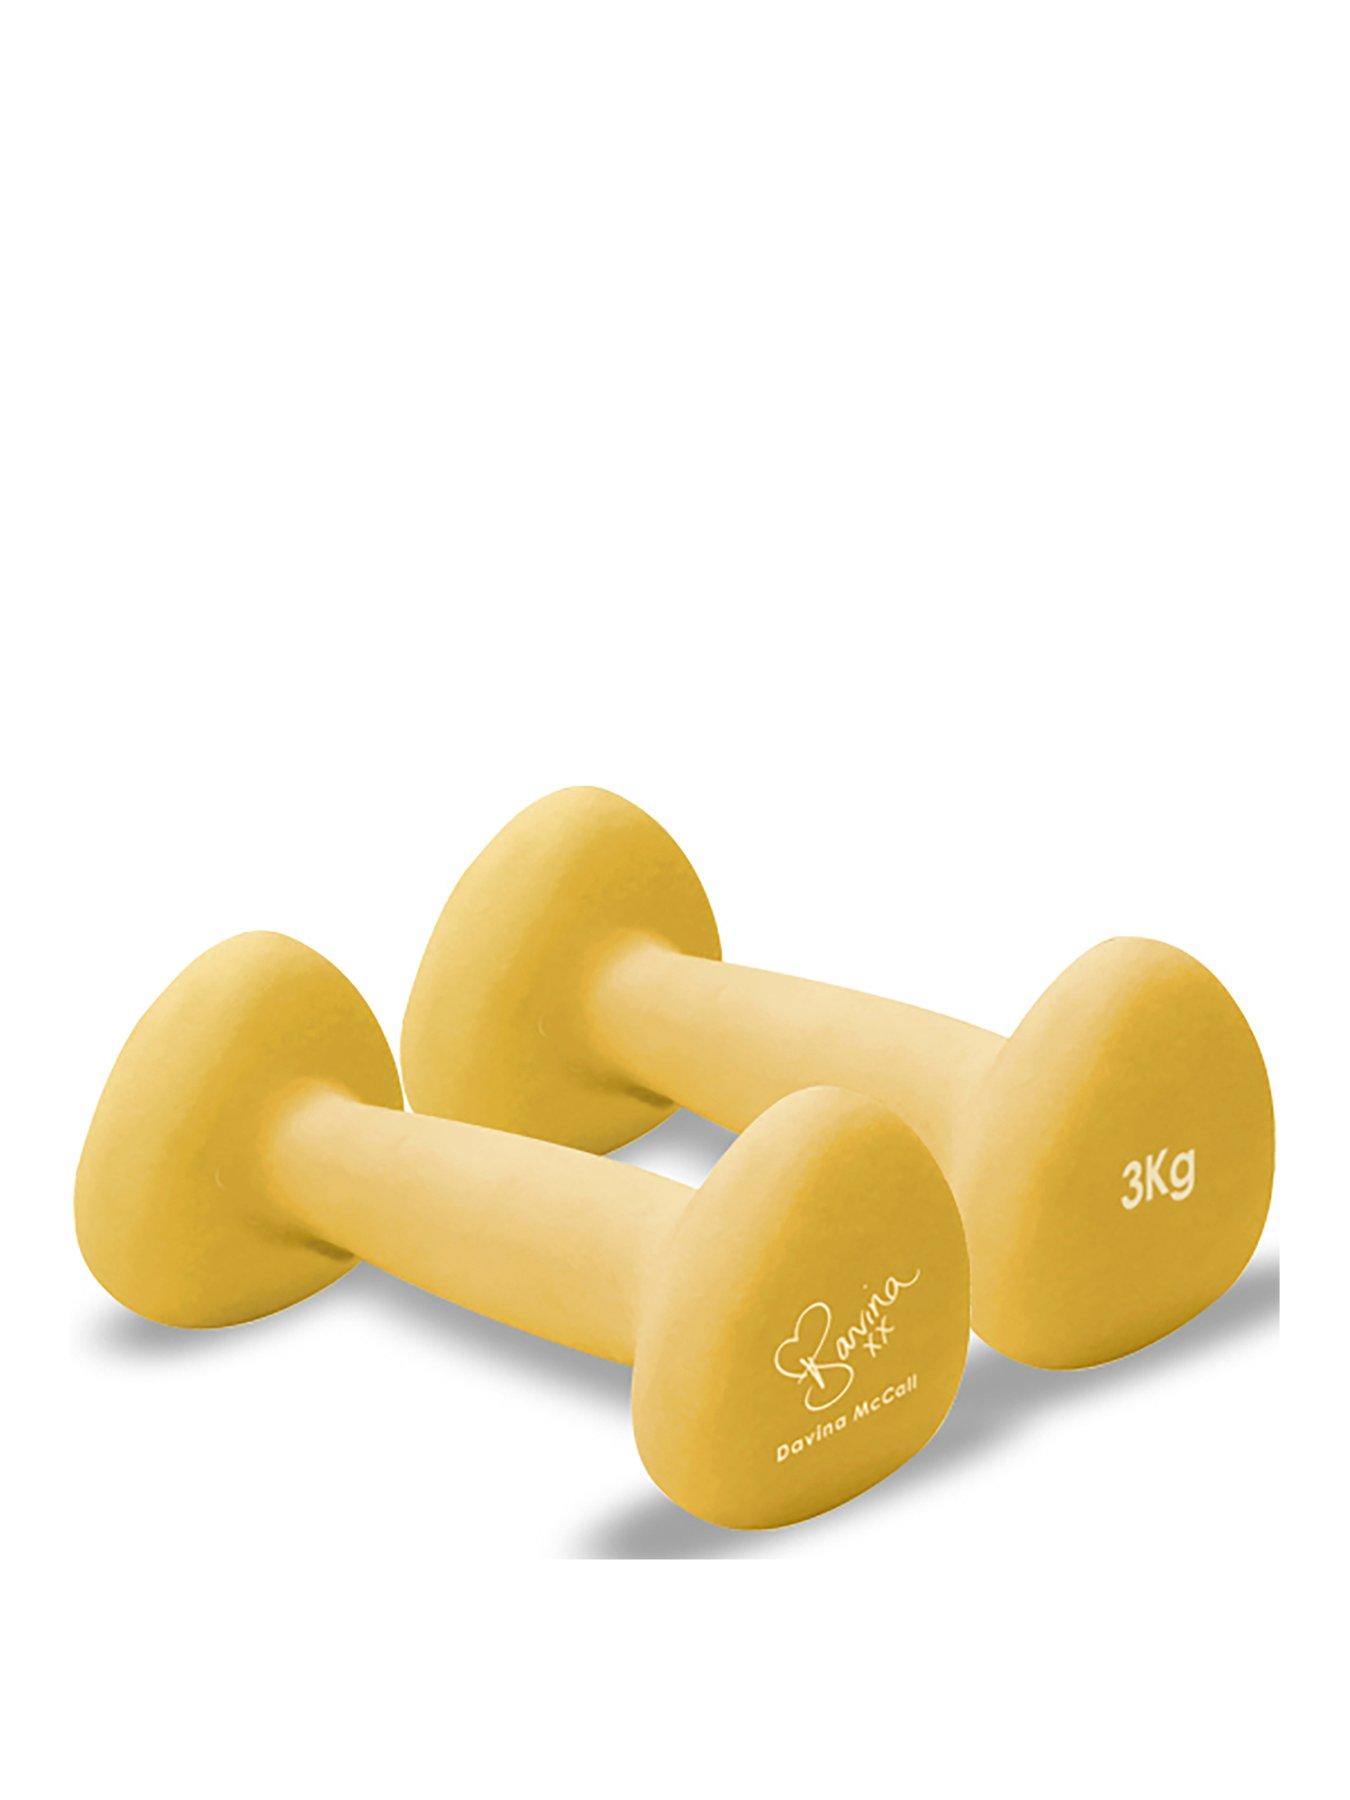 Details about   Single Neoprene Dumbbell Weight Suitable for Home and Gym Exercise 1KG 1.5KG 2KG 